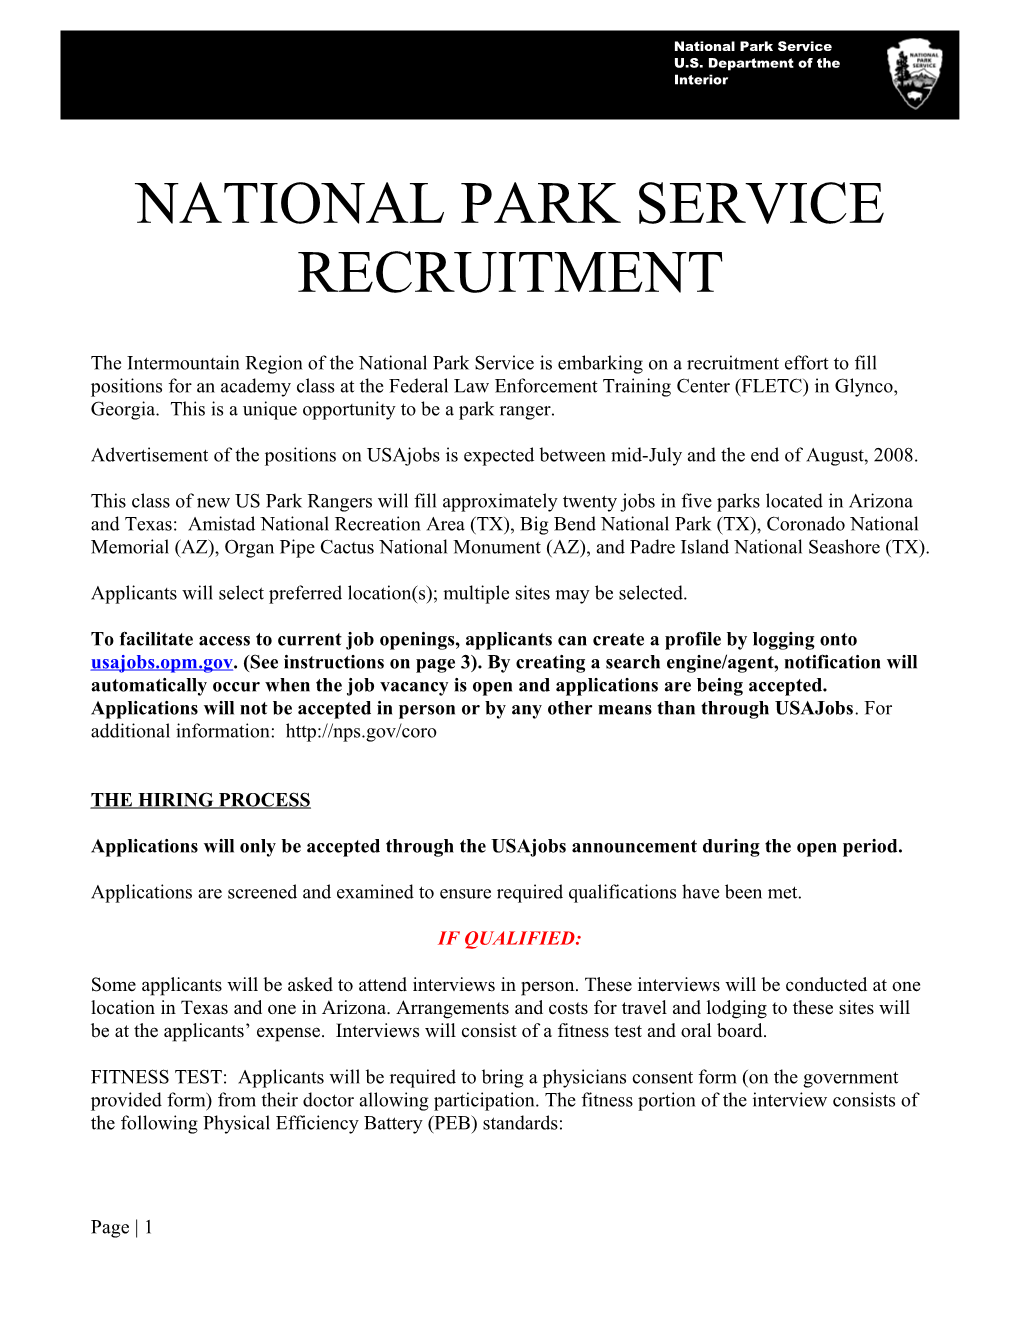 The Intermountain Region of the National Park Service Is Embarking on a Recruitment Effort